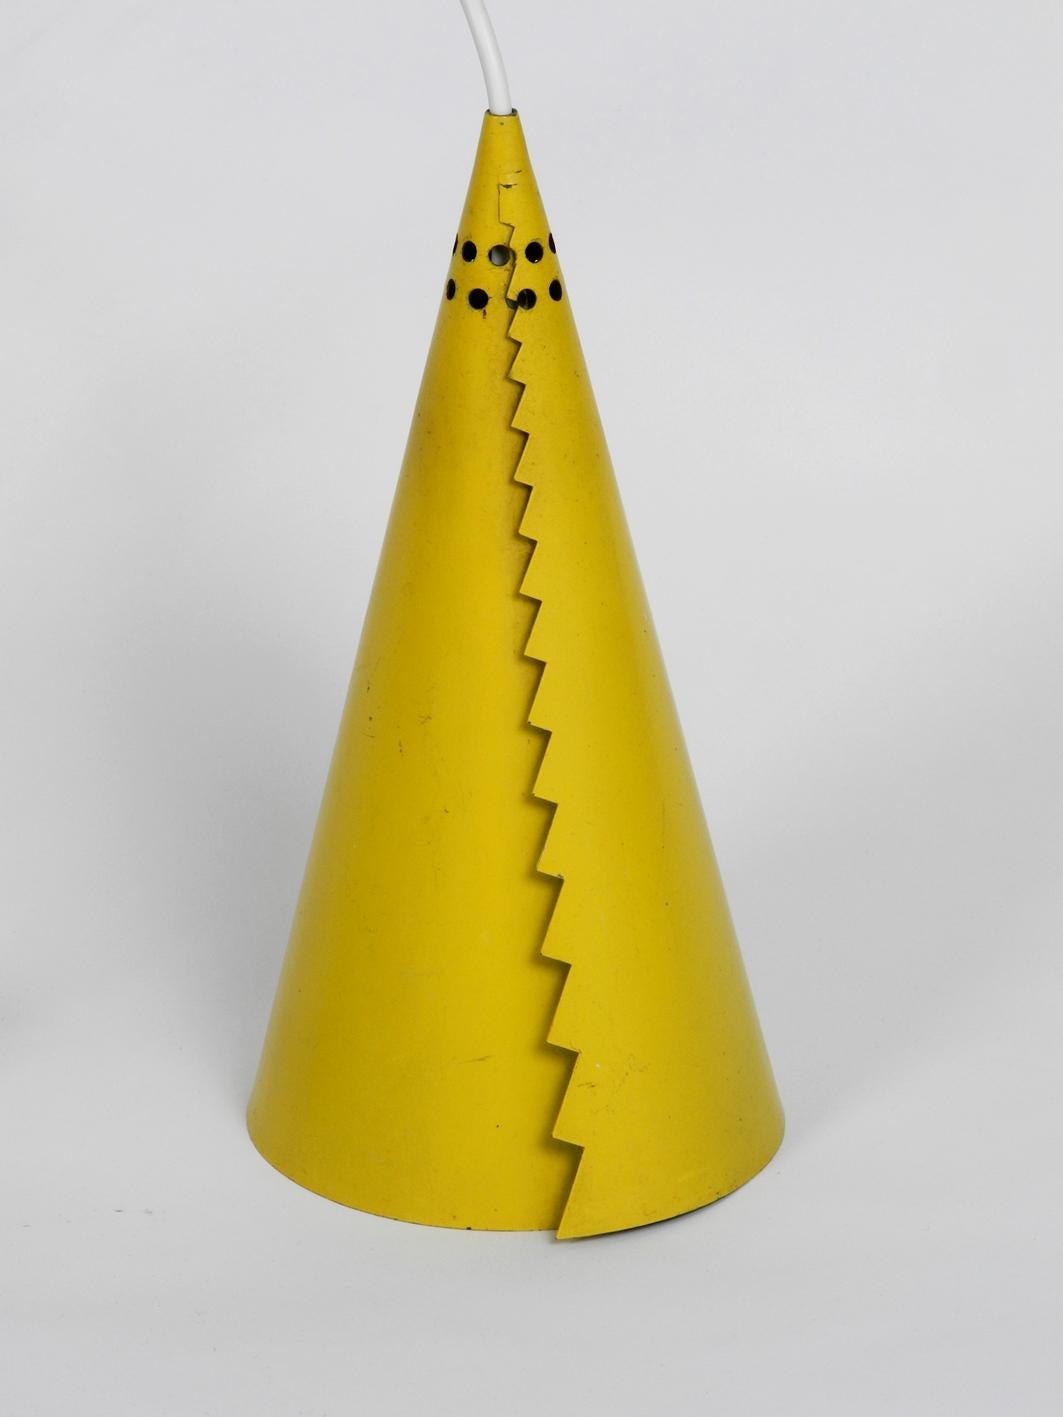 Rare Mid-Century Modern Cone Shaped Pendant Lamp Made of Sheet Steel in Yellow For Sale 3